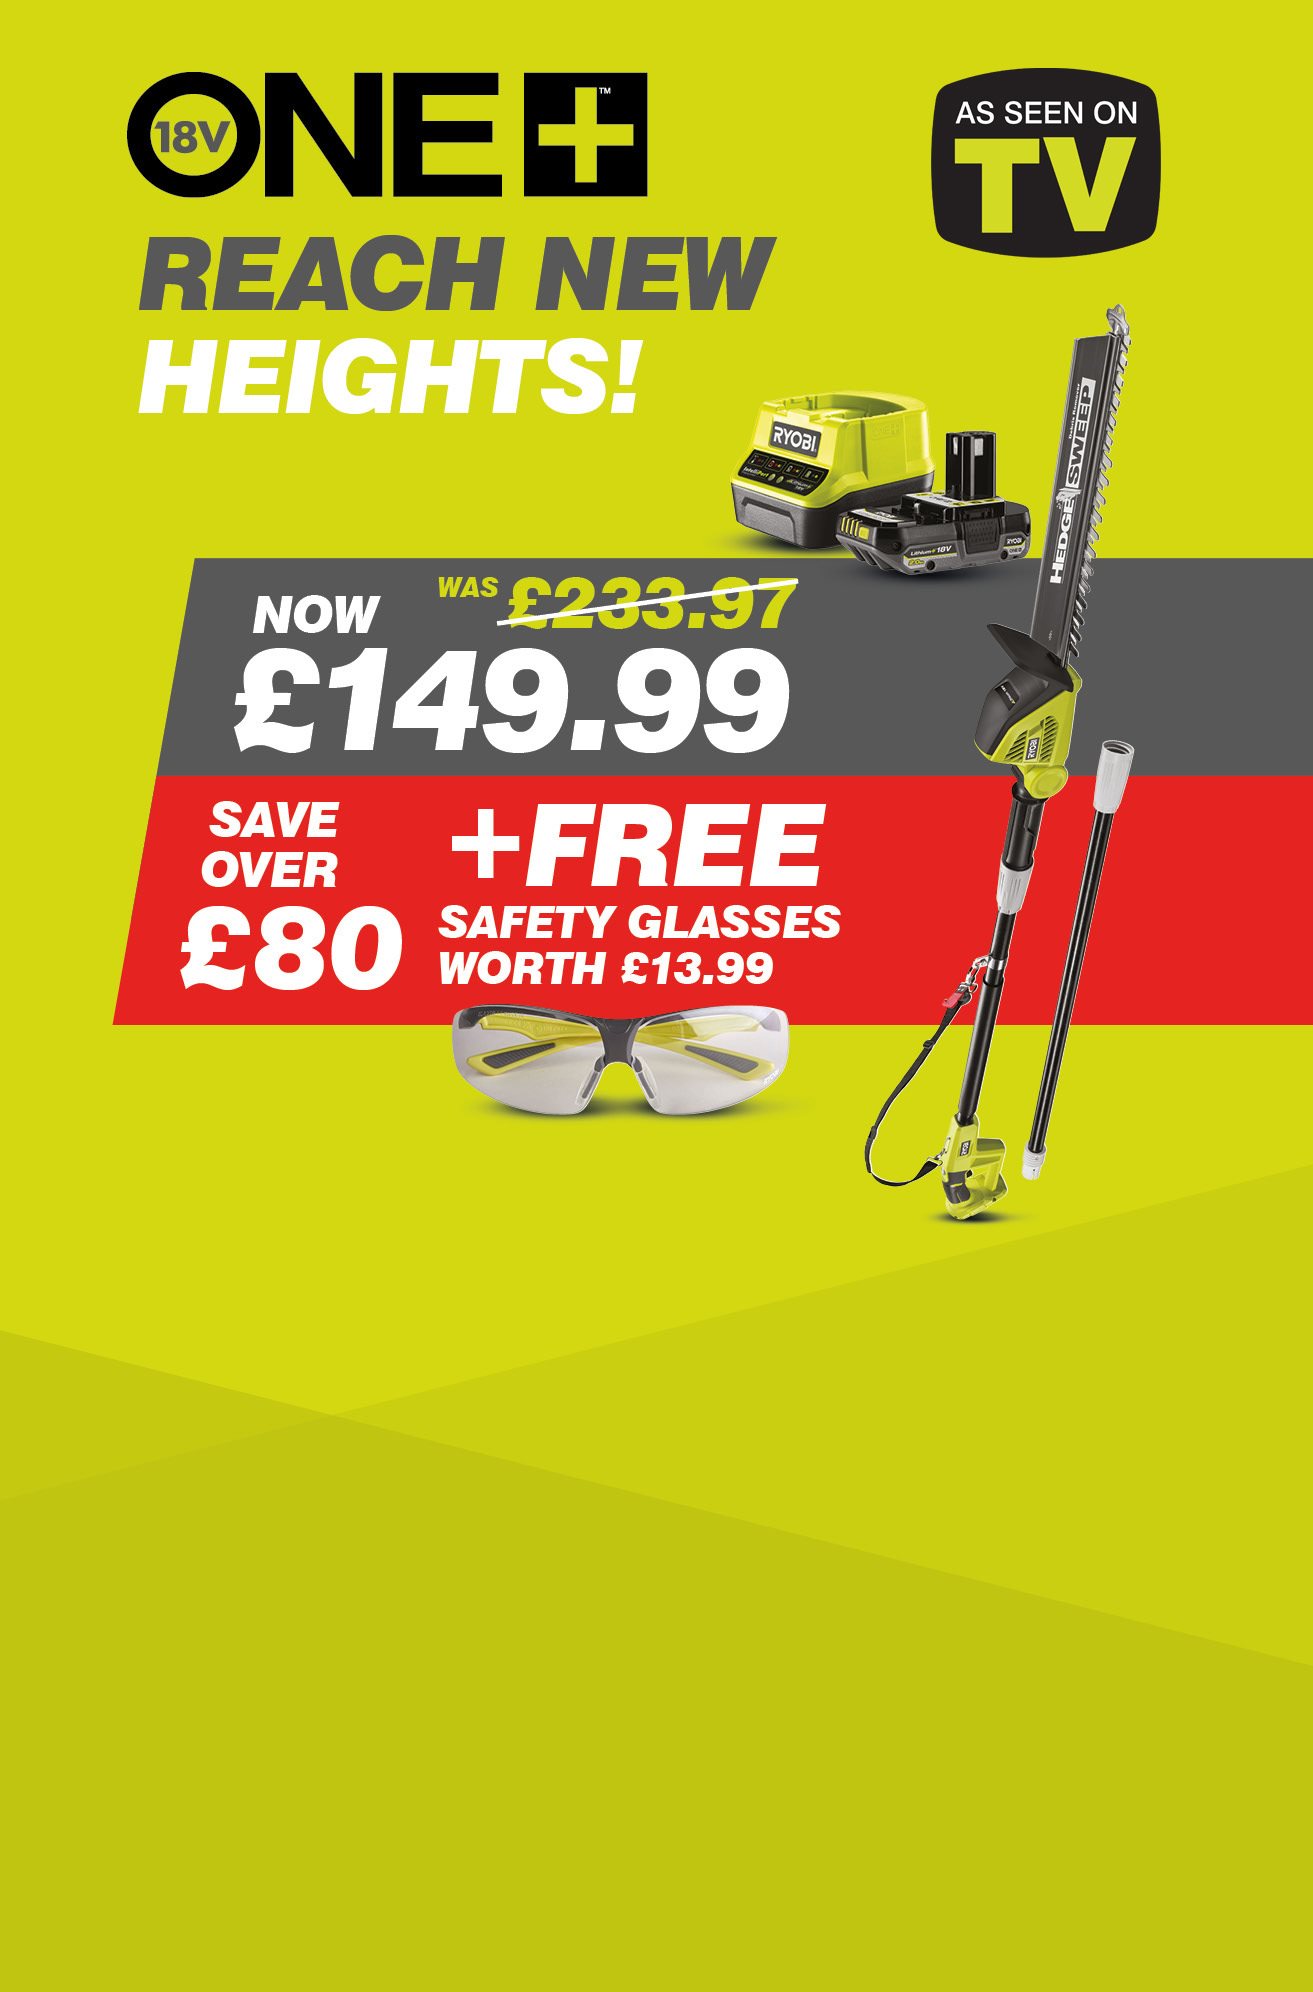 AS SEEN ON TV - POLE HEDGE TRIMMER